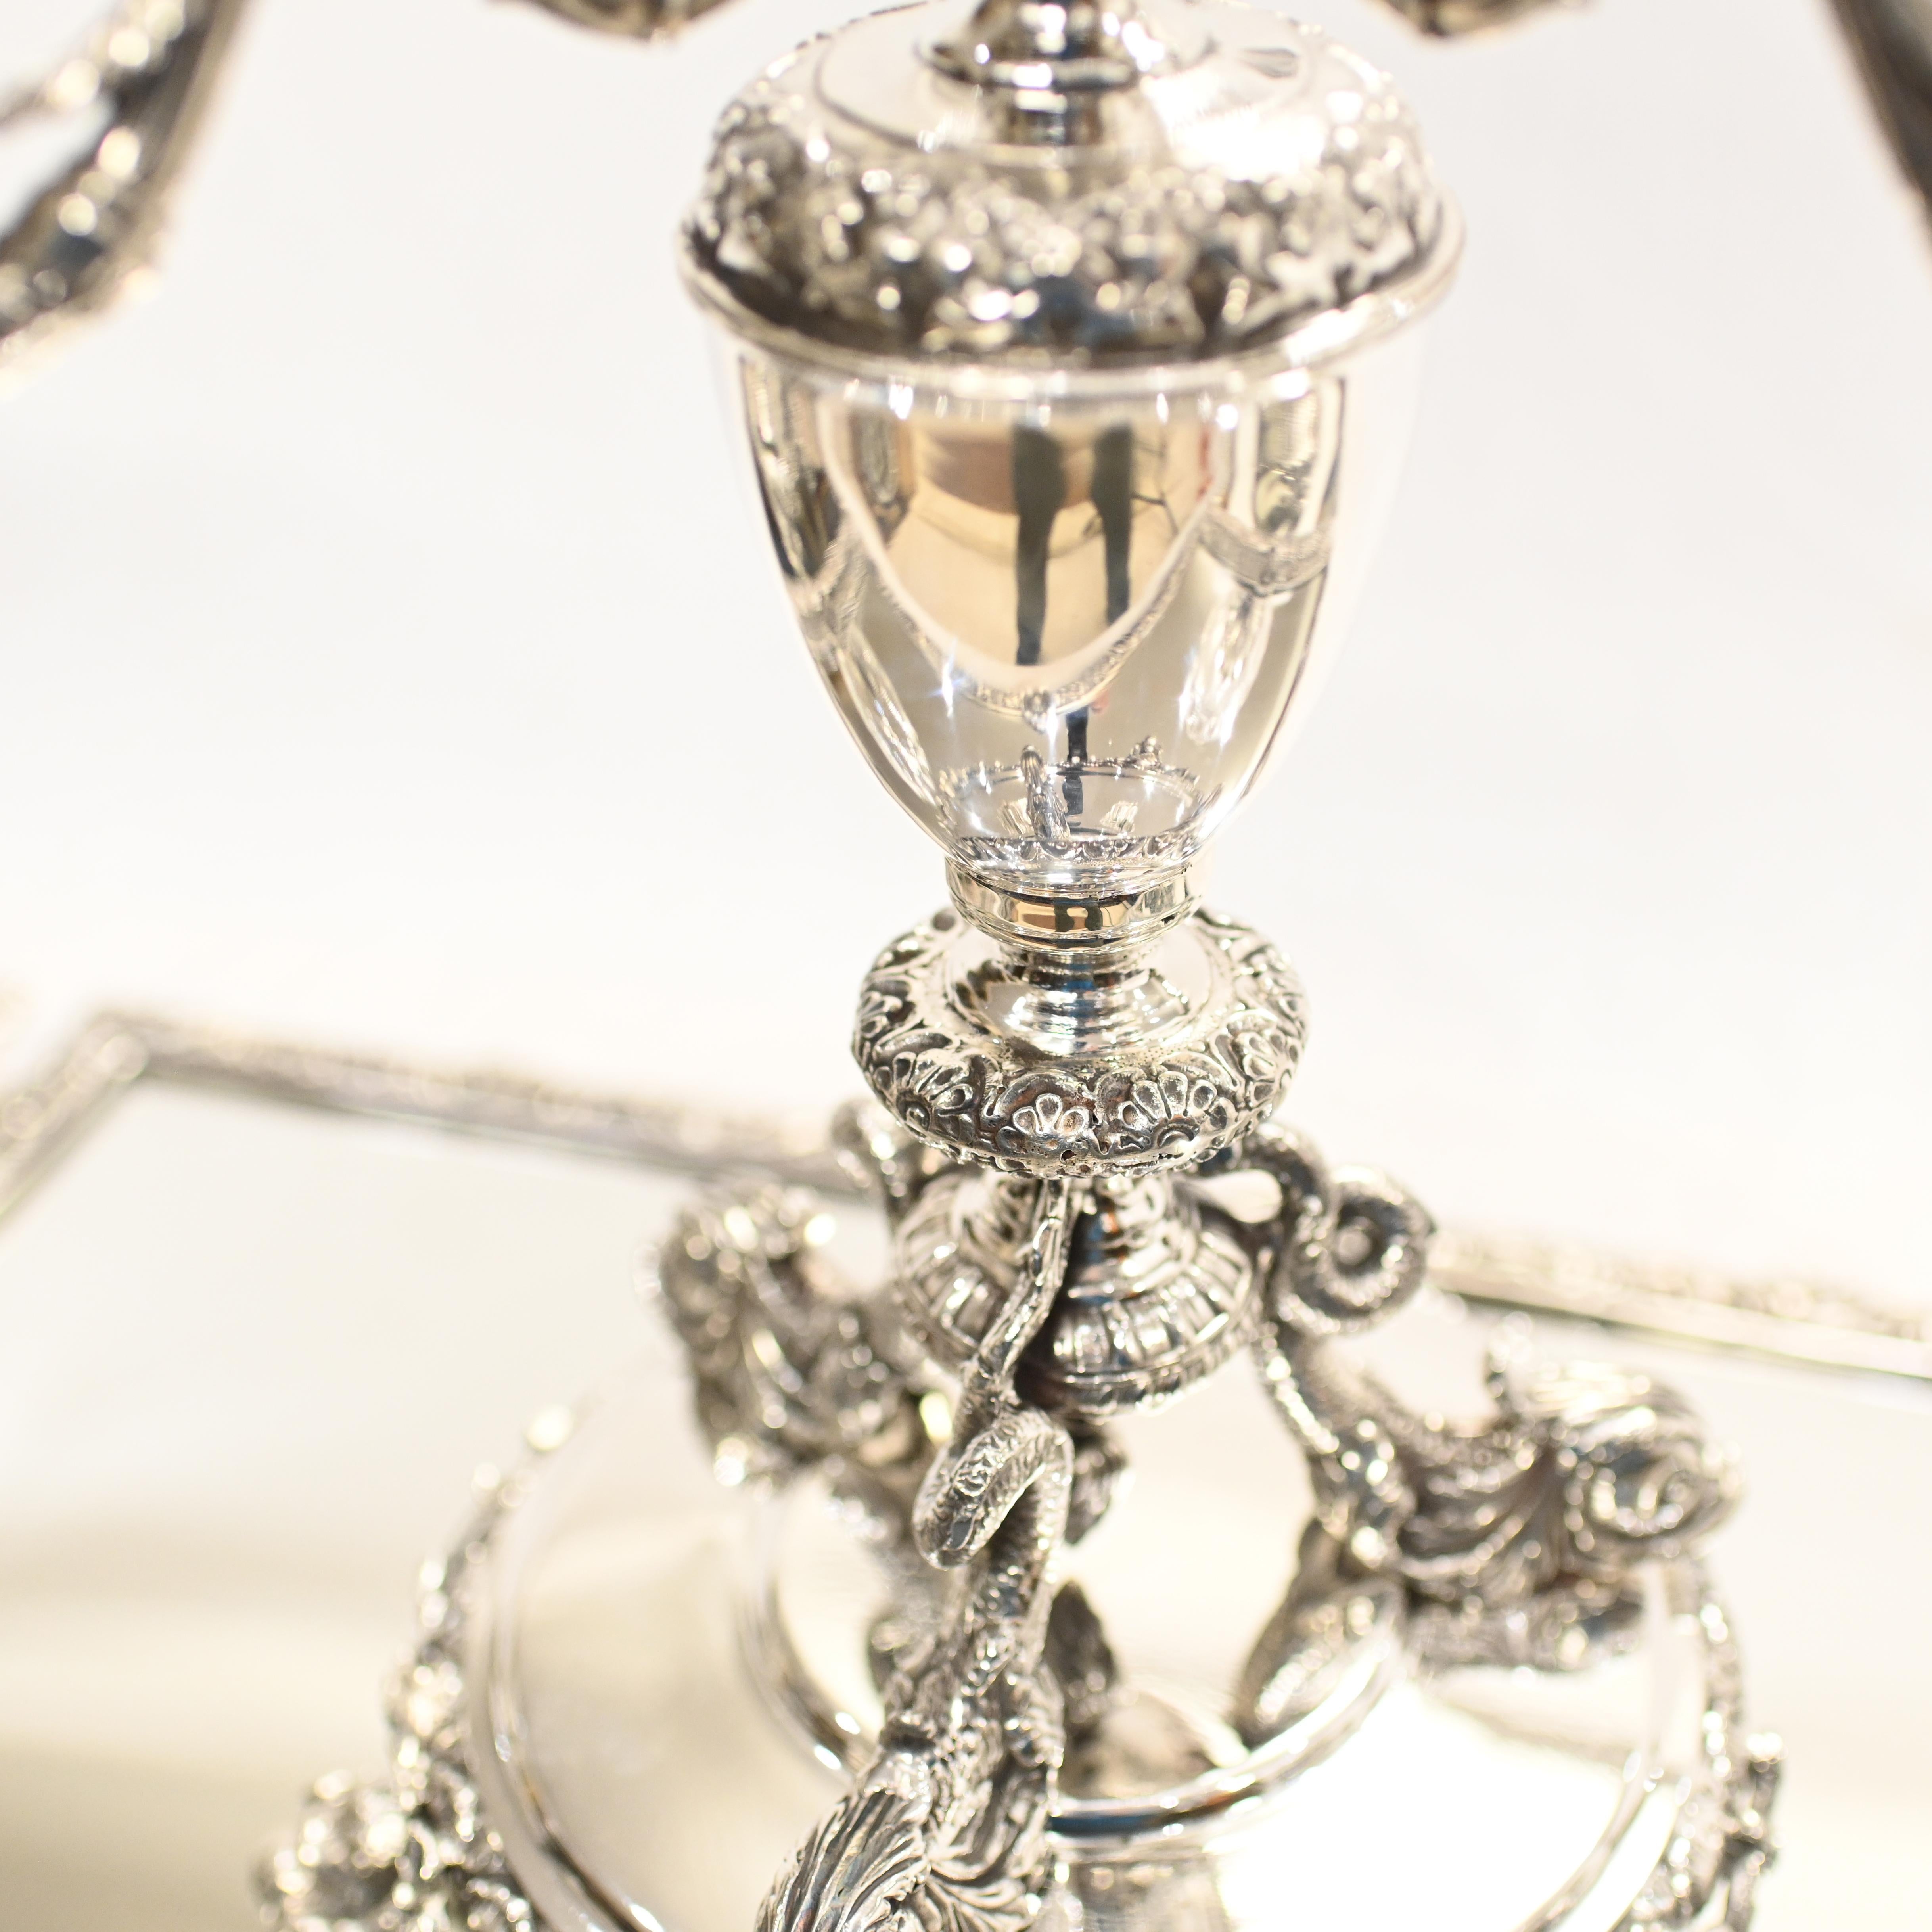 Silver Plate Centrepiece Epergne Cherub Glass Table Display For Sale 4